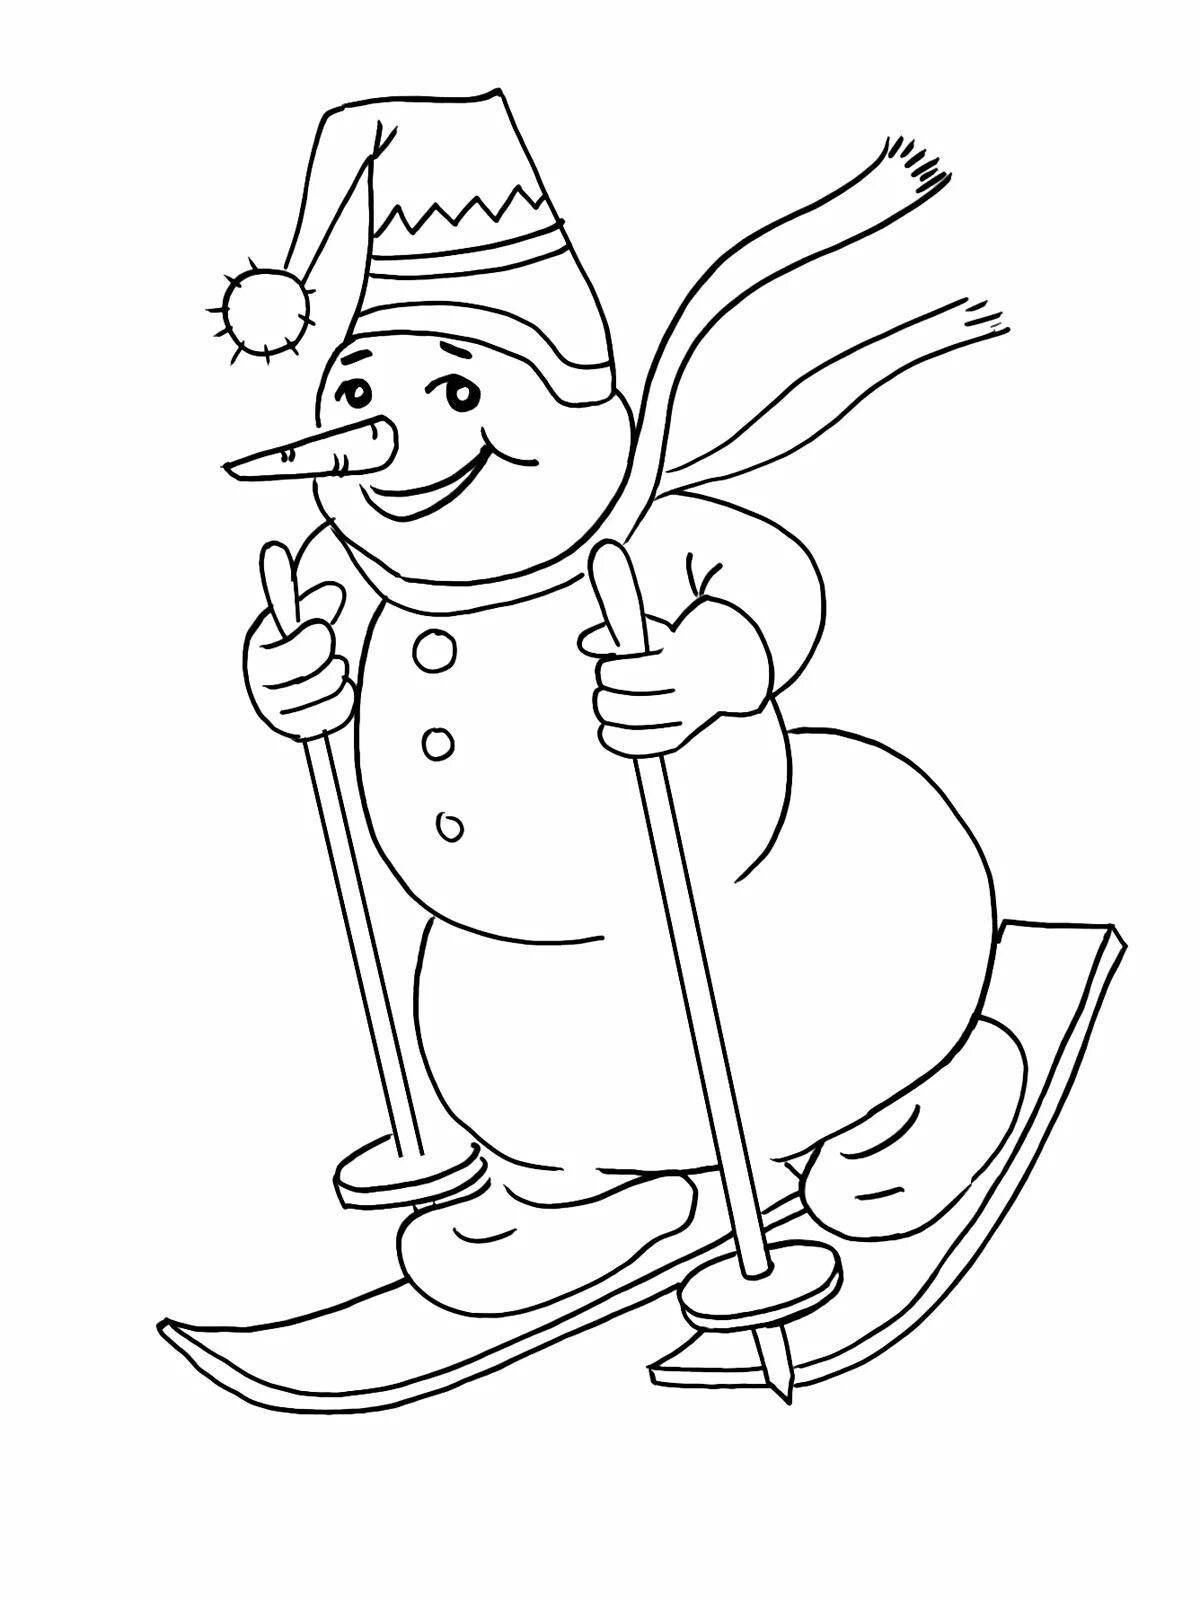 Fabulous coloring book snowman on skates for kids